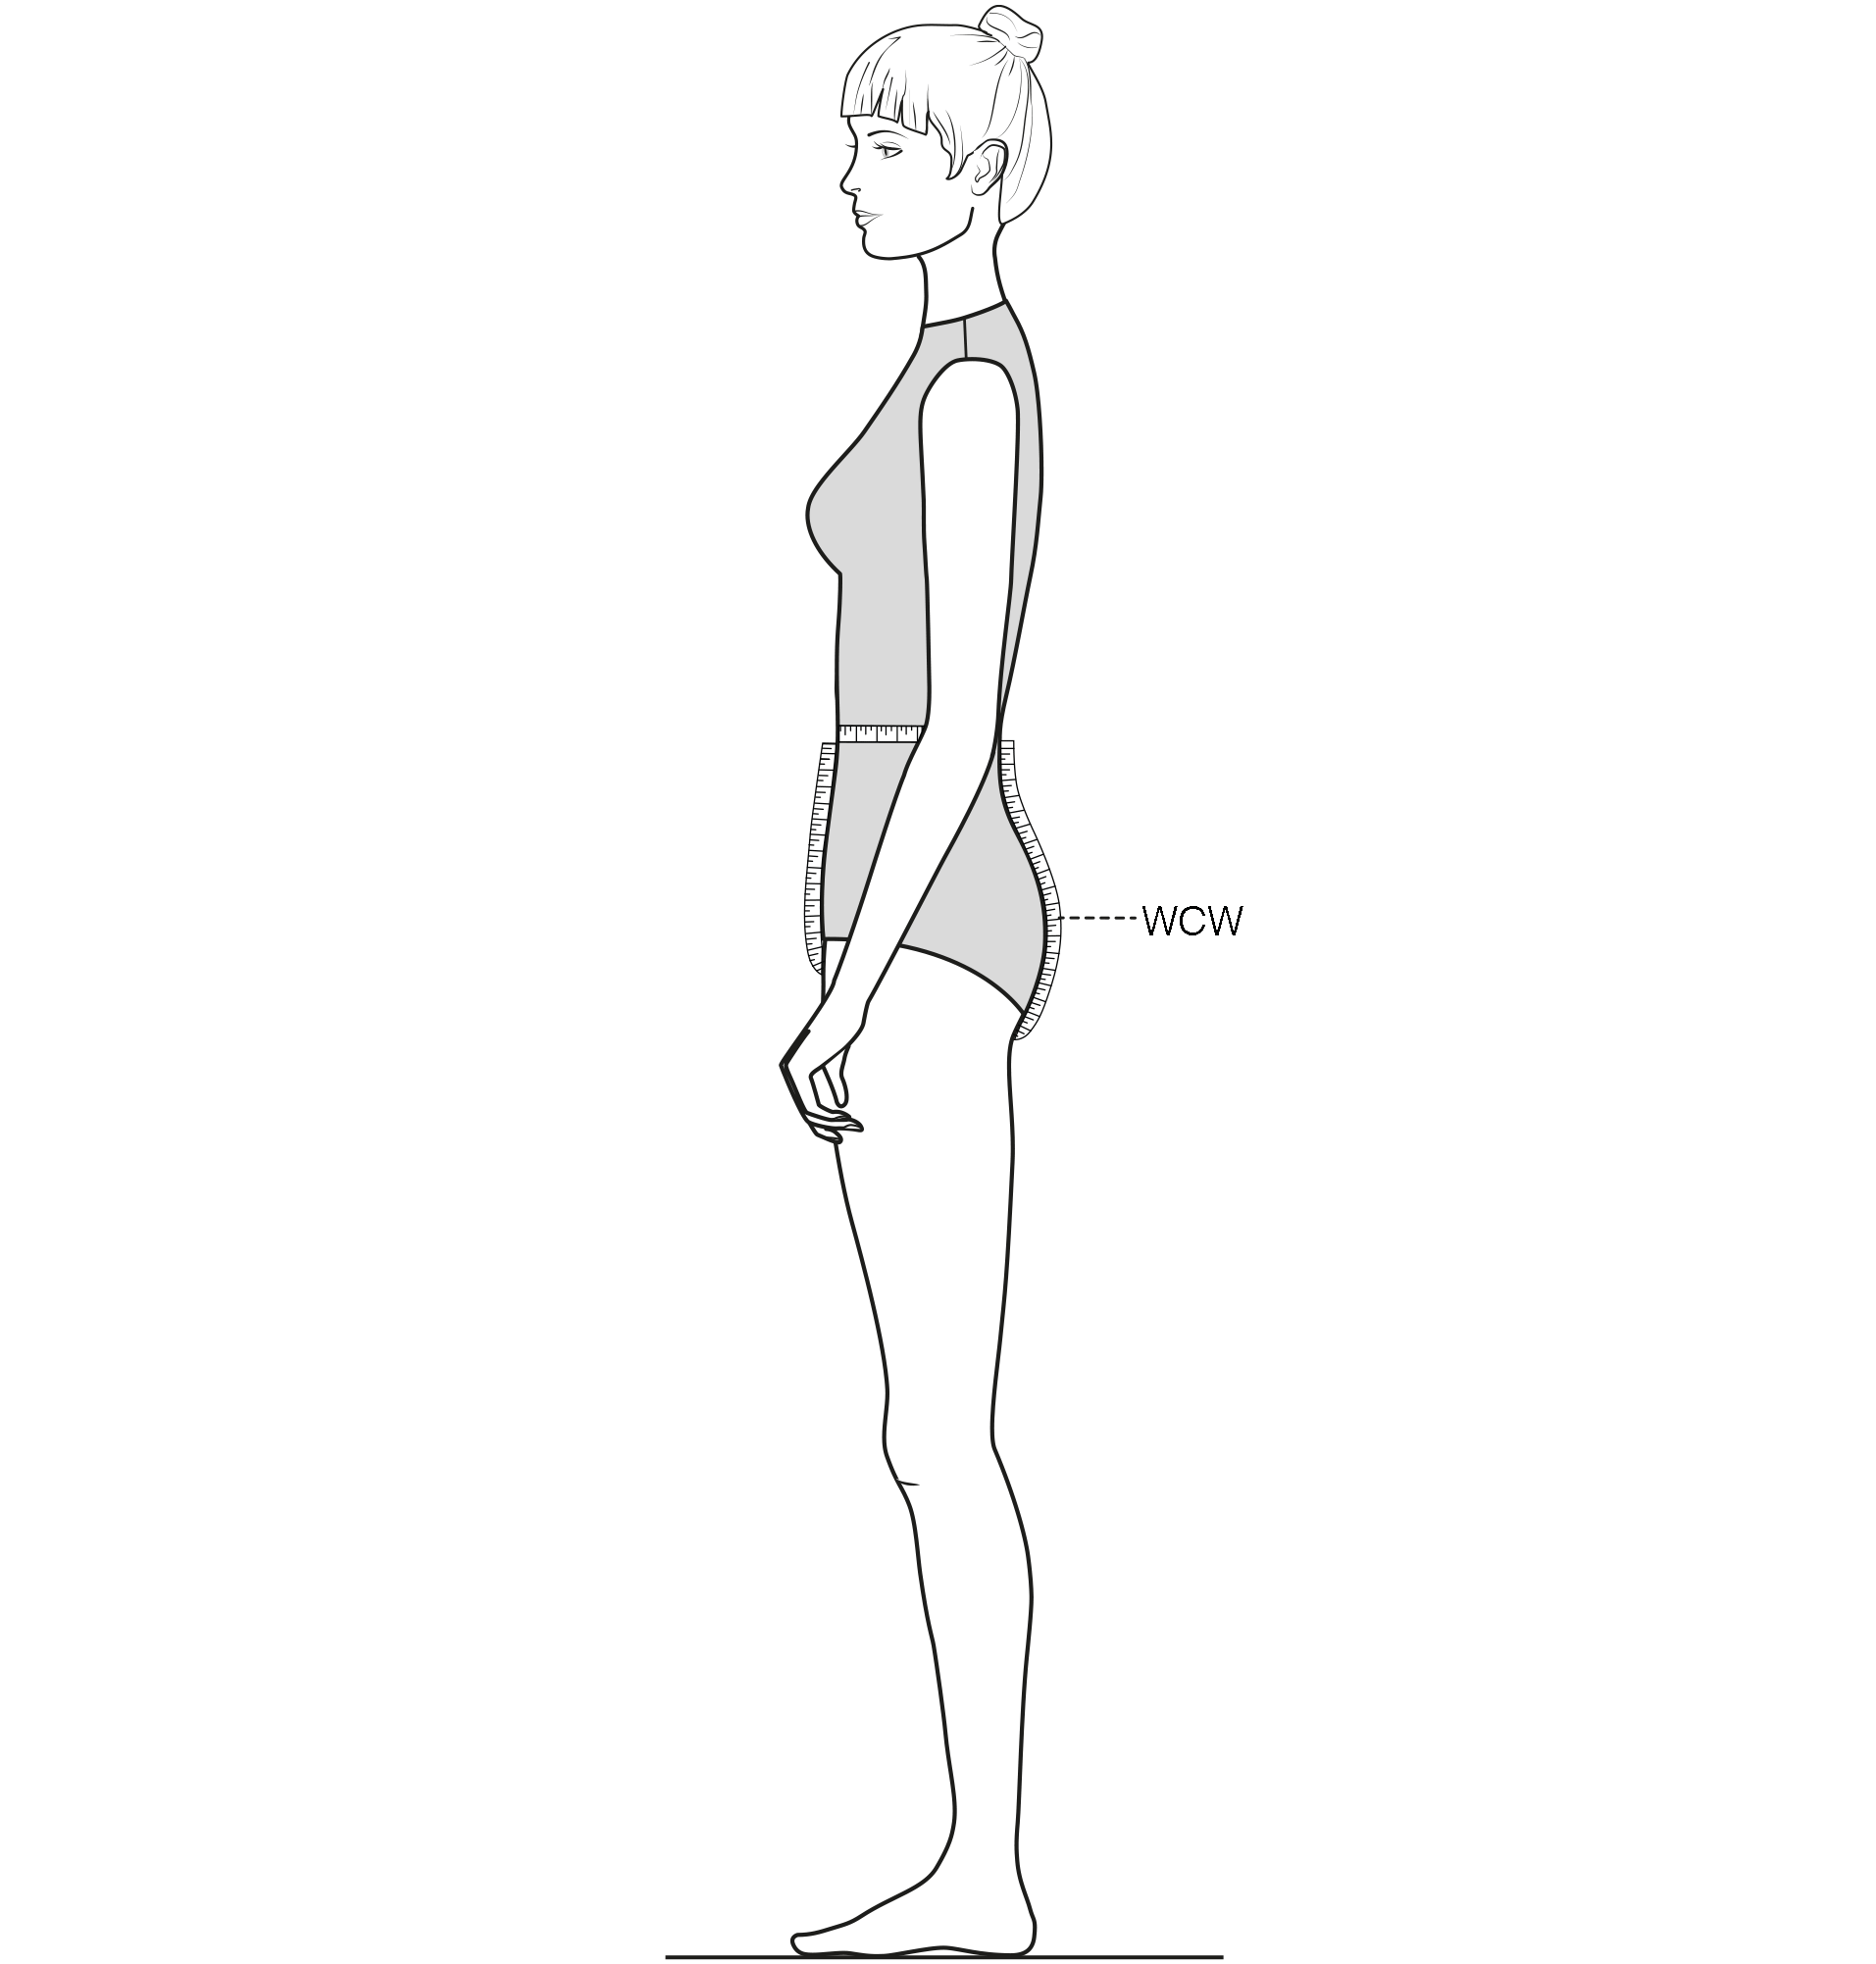 This figure shows the measurement of the Waist-crotch-waist measure